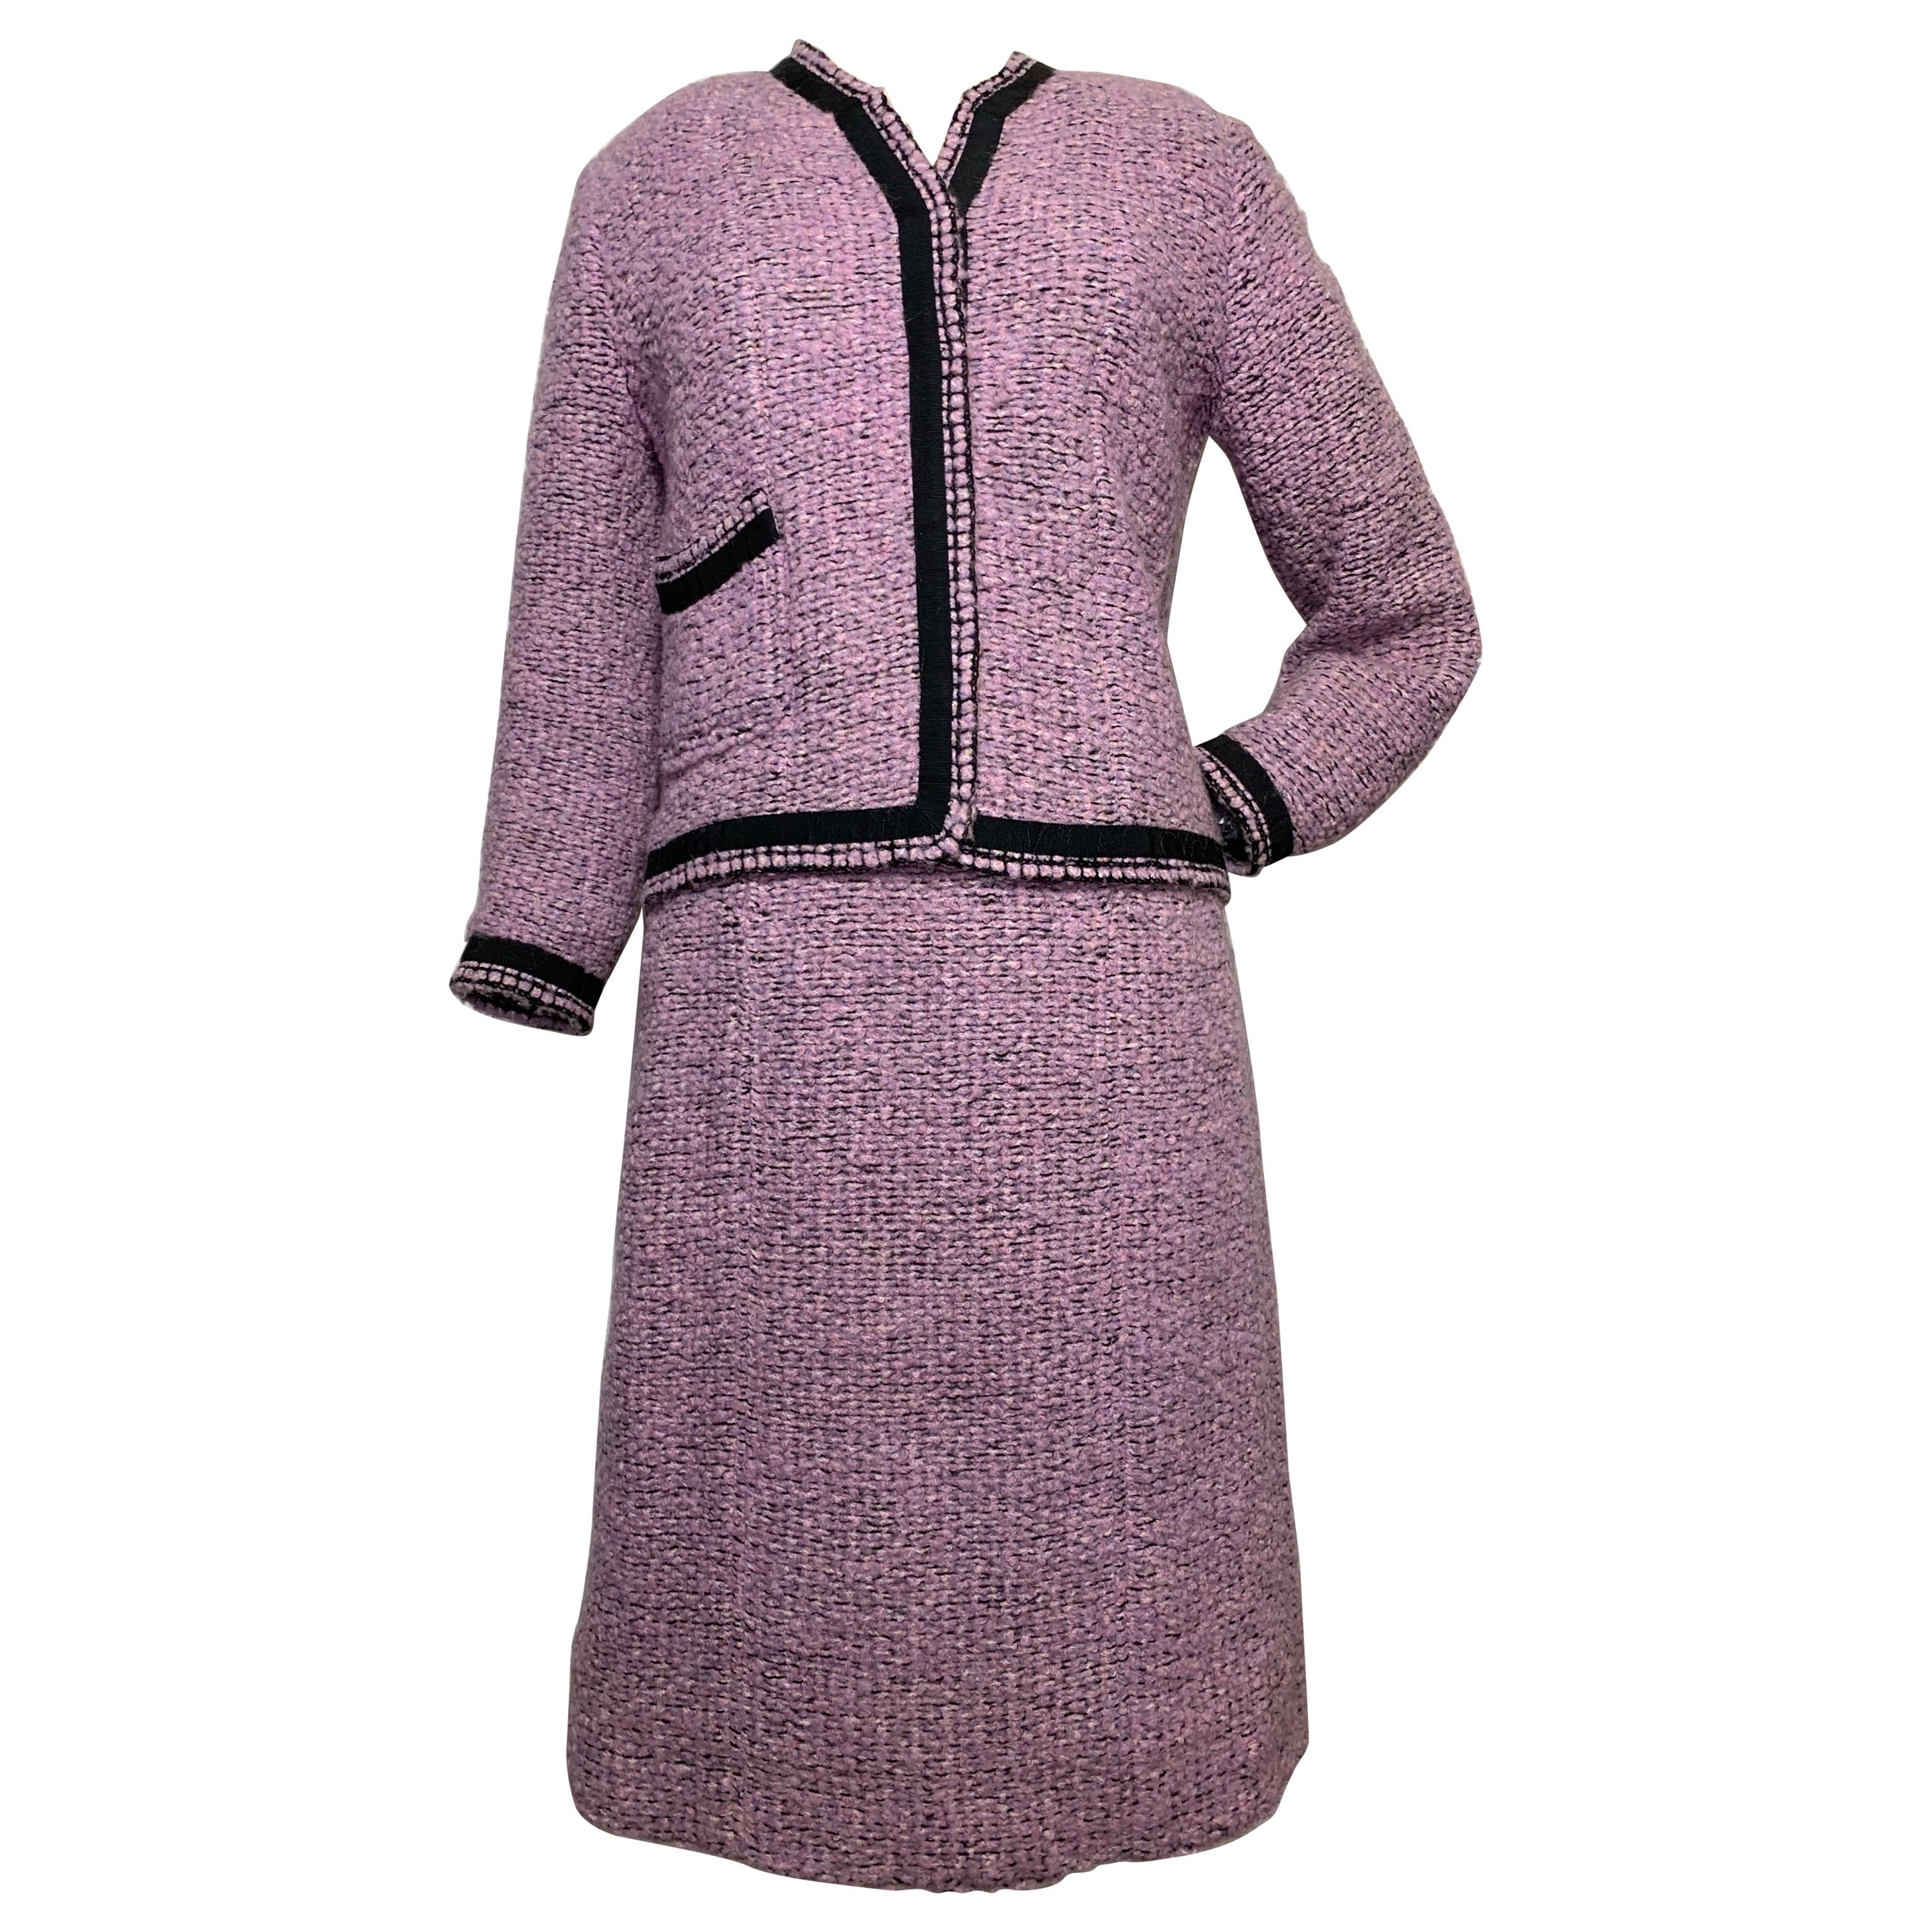 1960 Autumn/Winter Chanel Haute Couture Documented Lavender Tweed Skirt Suit  For Sale